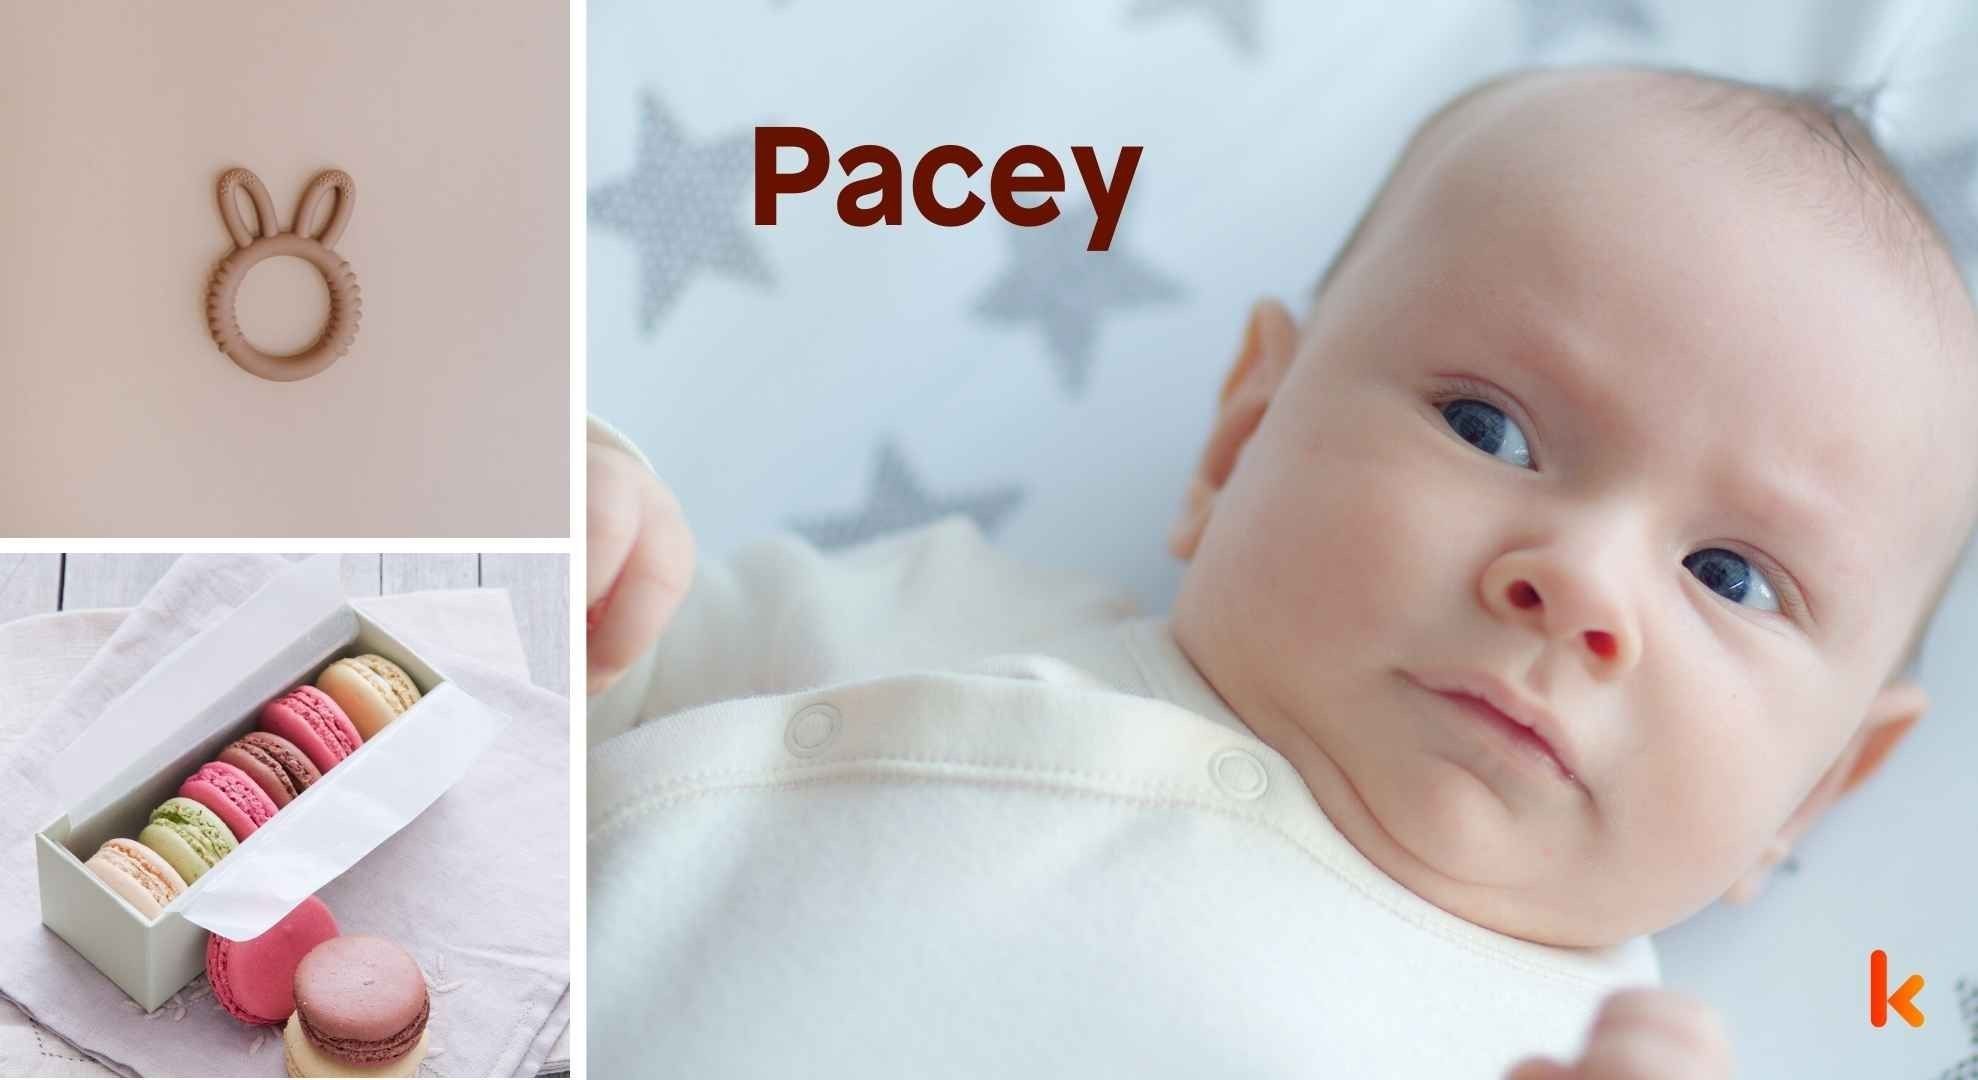 Meaning of the name Pacey